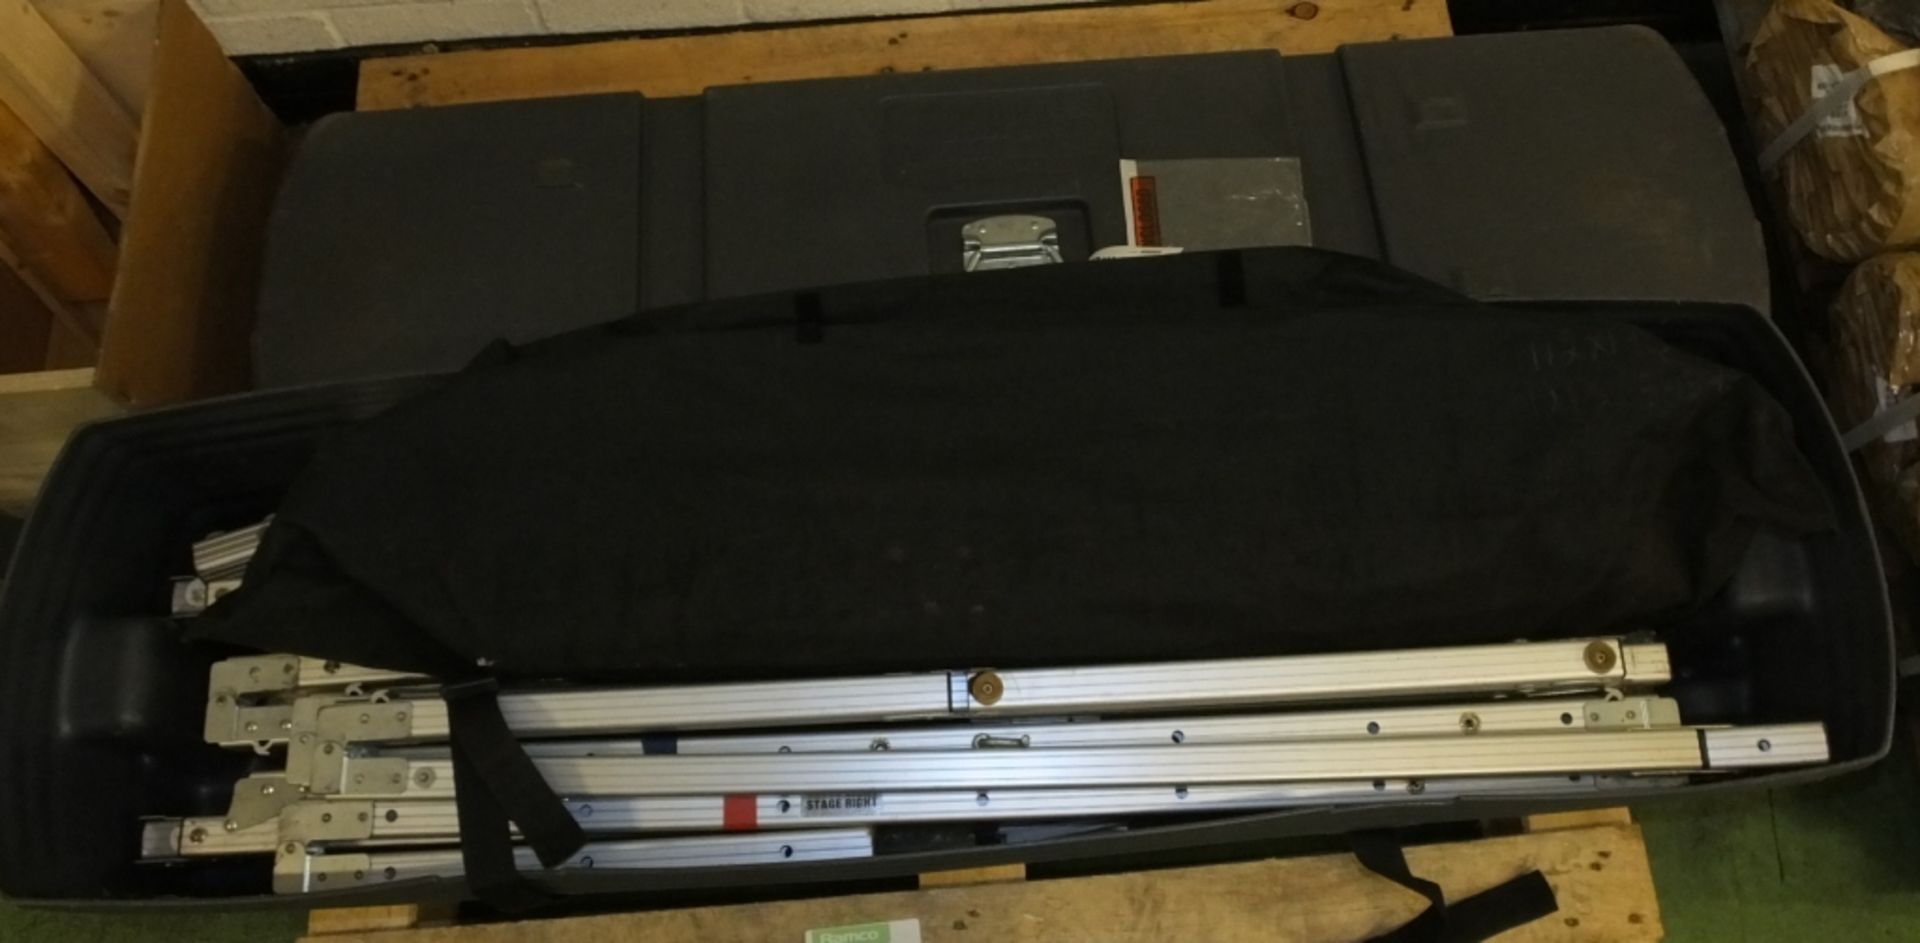 Draper Cinefold Projection Screen assembly in carry case